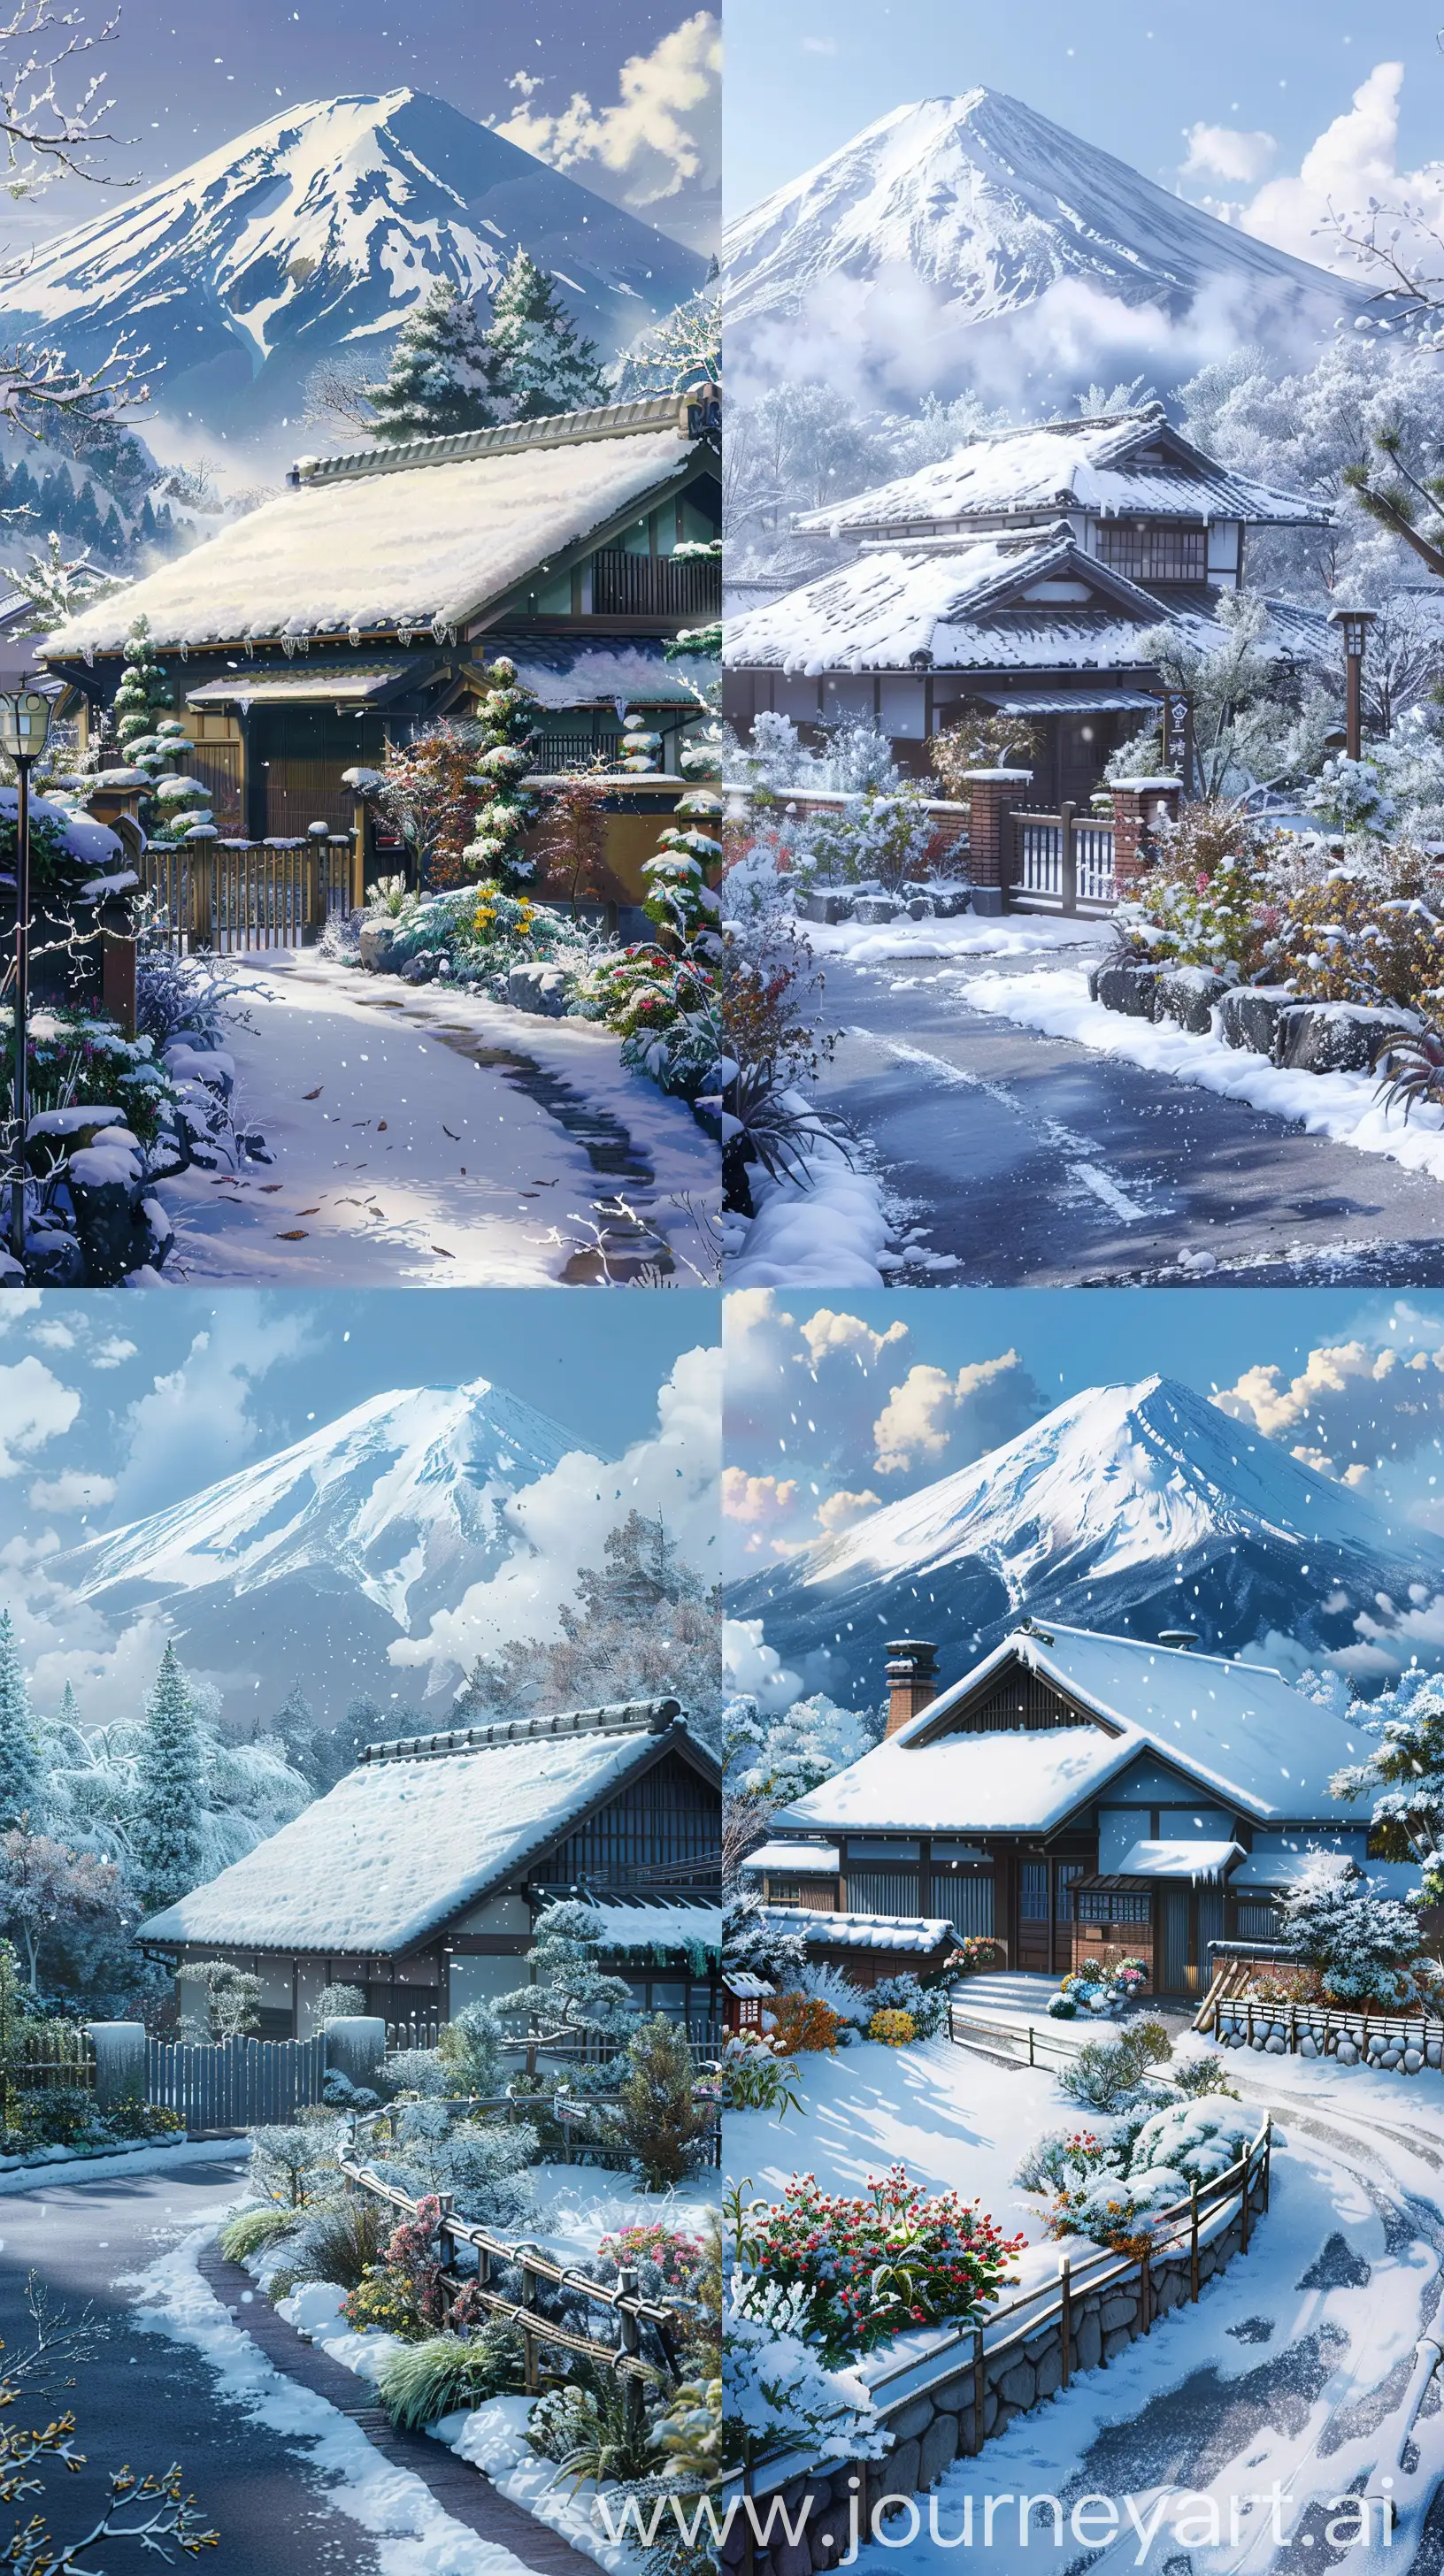 !mj1 Ghibli studio theme, an anime-style house with snow-covered roof, boundaries along roadside, main gate nestled among small plants and flowers dusted with snow, imposing mountain in the highly detailed background, serene winter scene --ar 9:16 --v 6